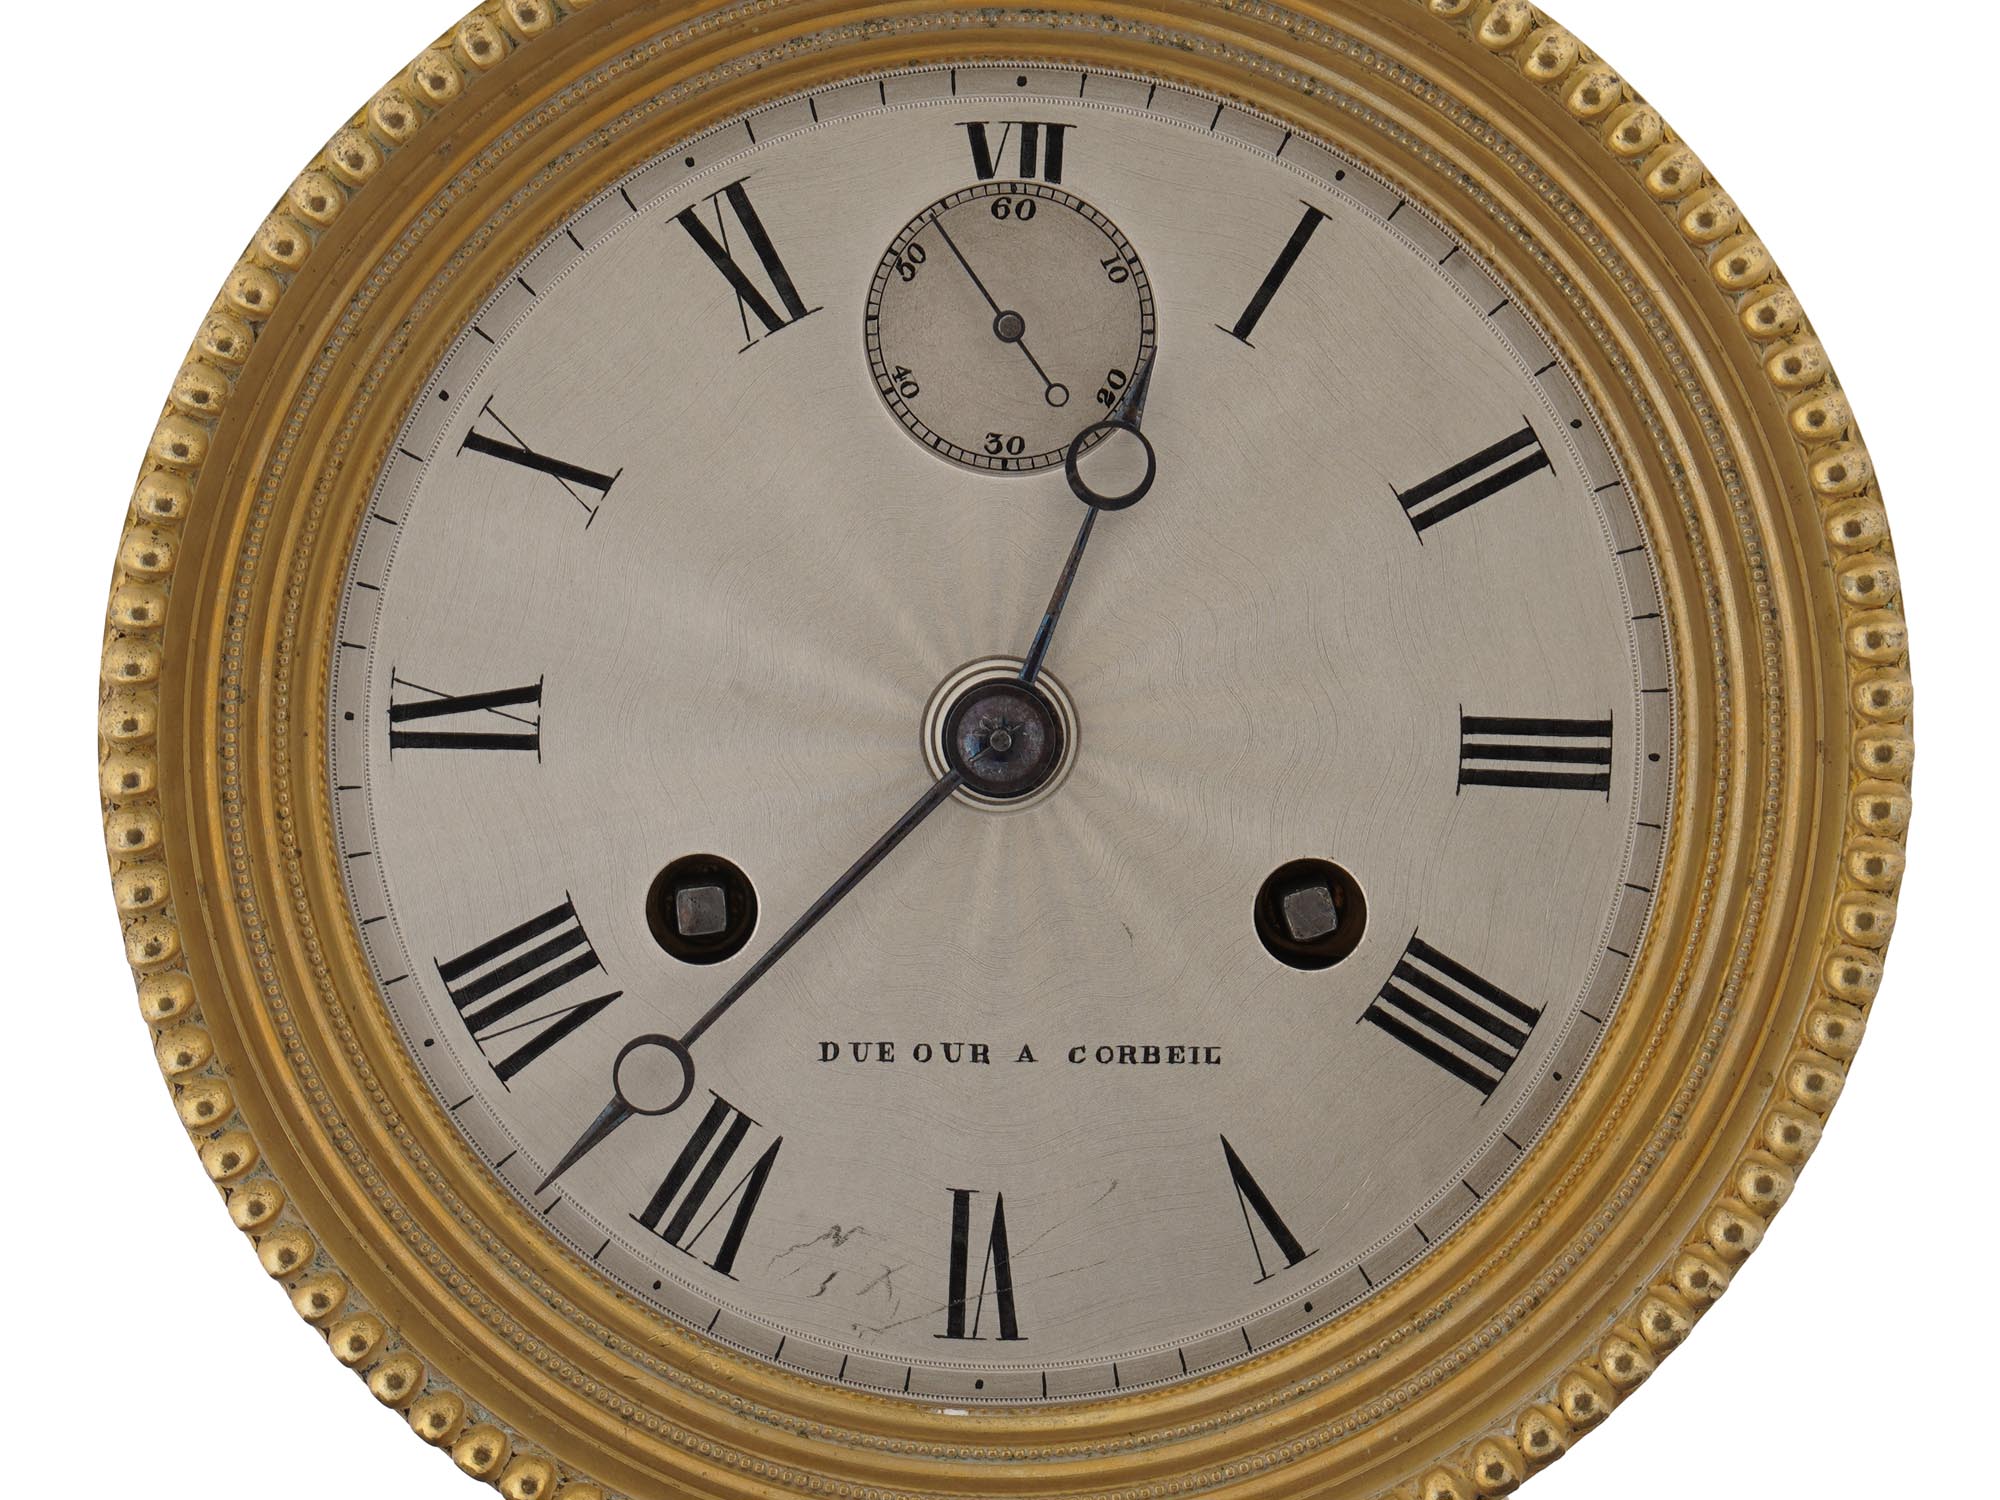 ANTIQUE FRENCH SHELL CLOCK UNDER GLASS DOME PIC-5